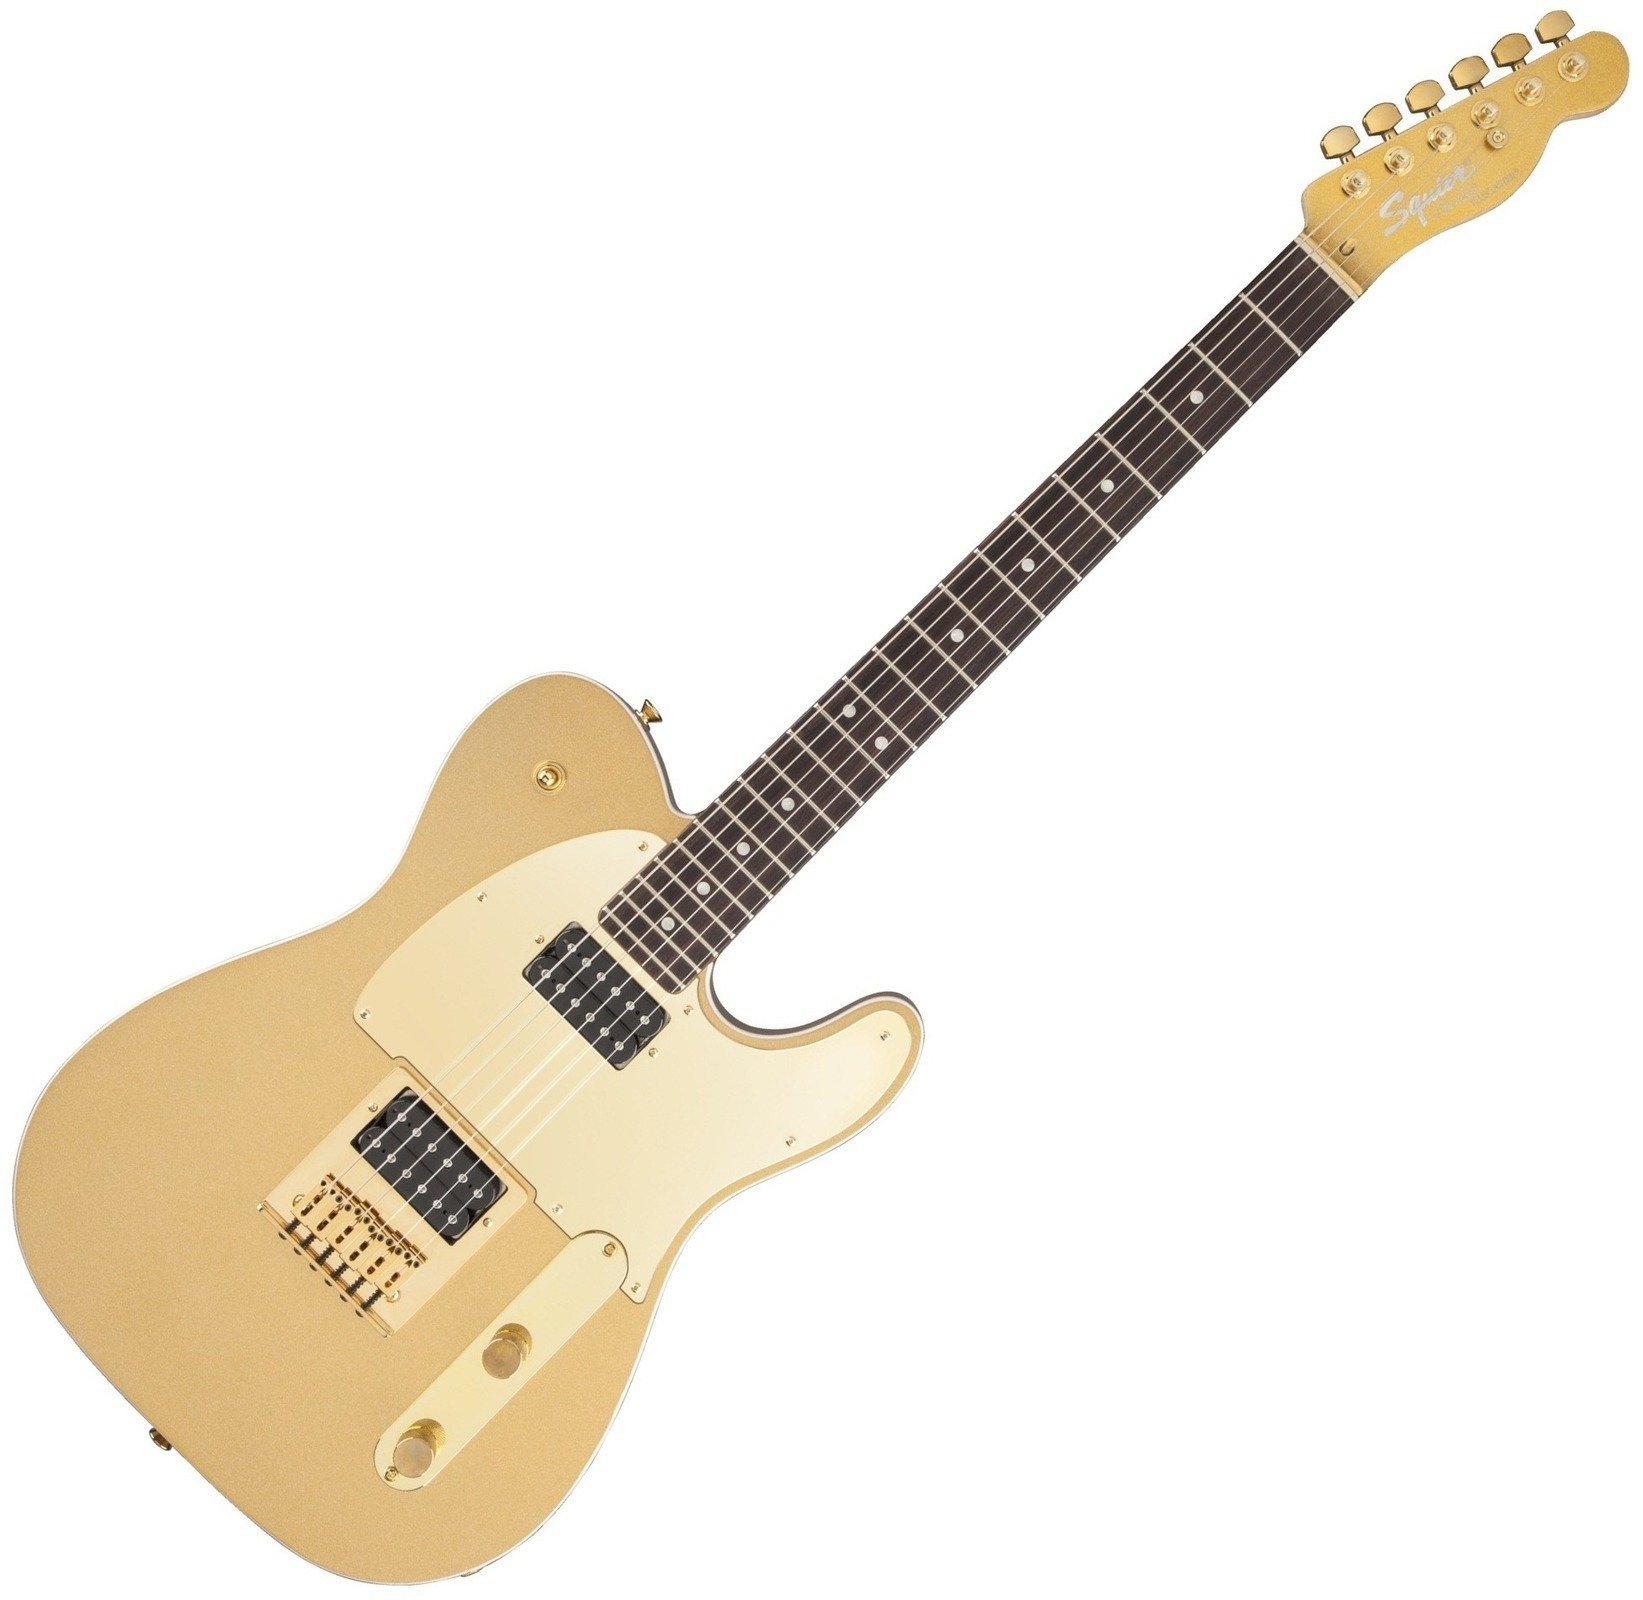 Electric guitar Fender Squier J5 Telecaster, Frost Gold